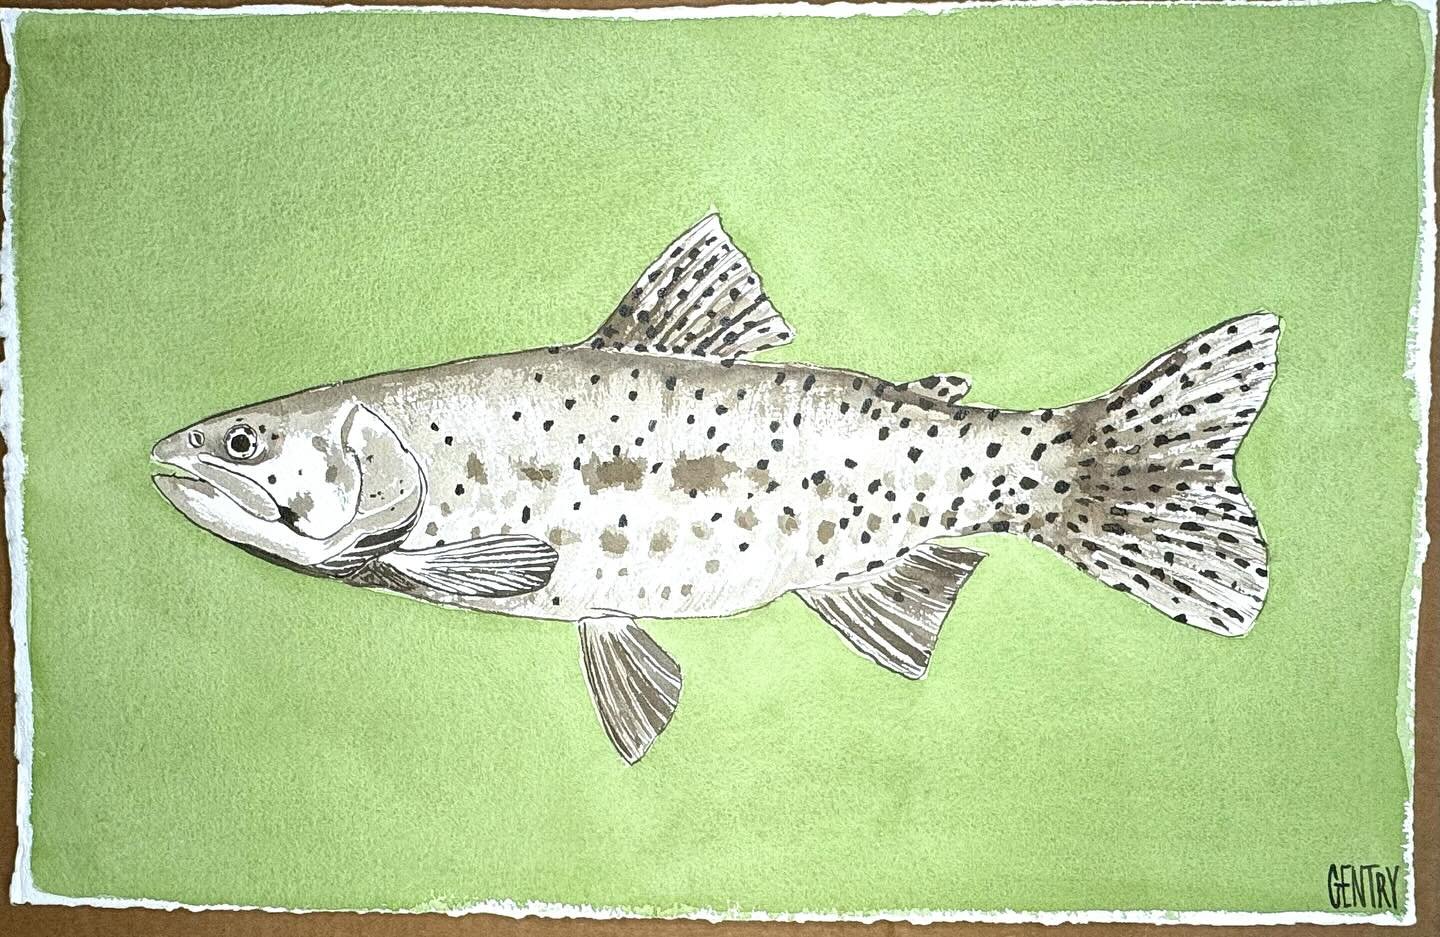 Graceful movement&hellip;

Trout are known for their streamlined bodies and distinctive speckled patterns. I love capturing the beauty and elegance of these fish with additions of vibrant colors and fluid strokes.
 
22 x 15
Ink and Watercolor Trout 
